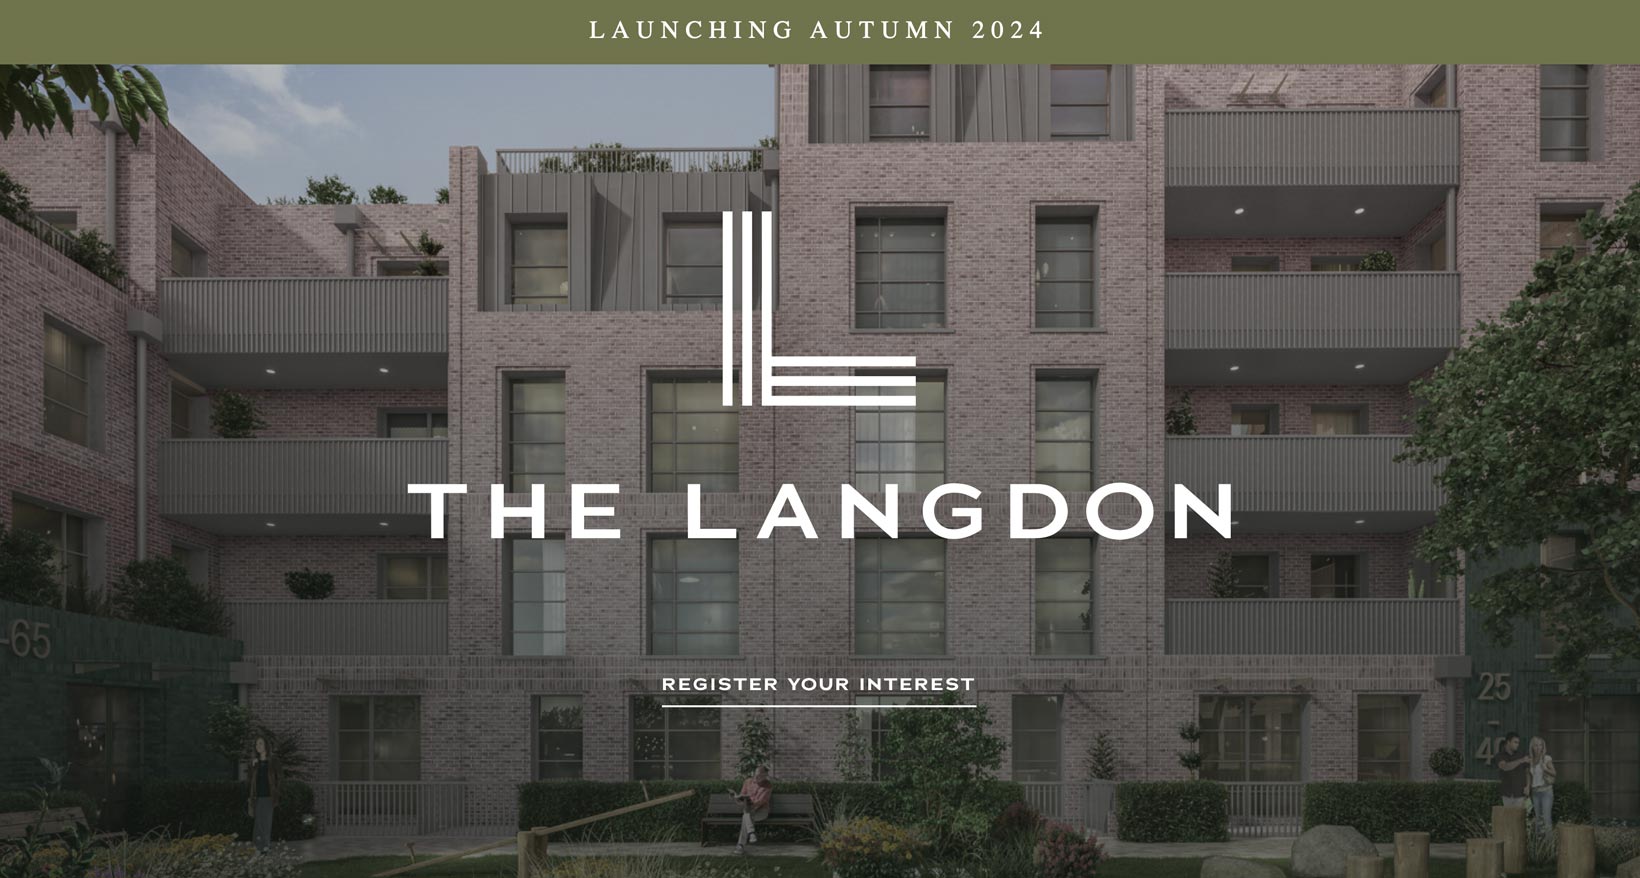 Register your interest now in the new homes at The Langdon